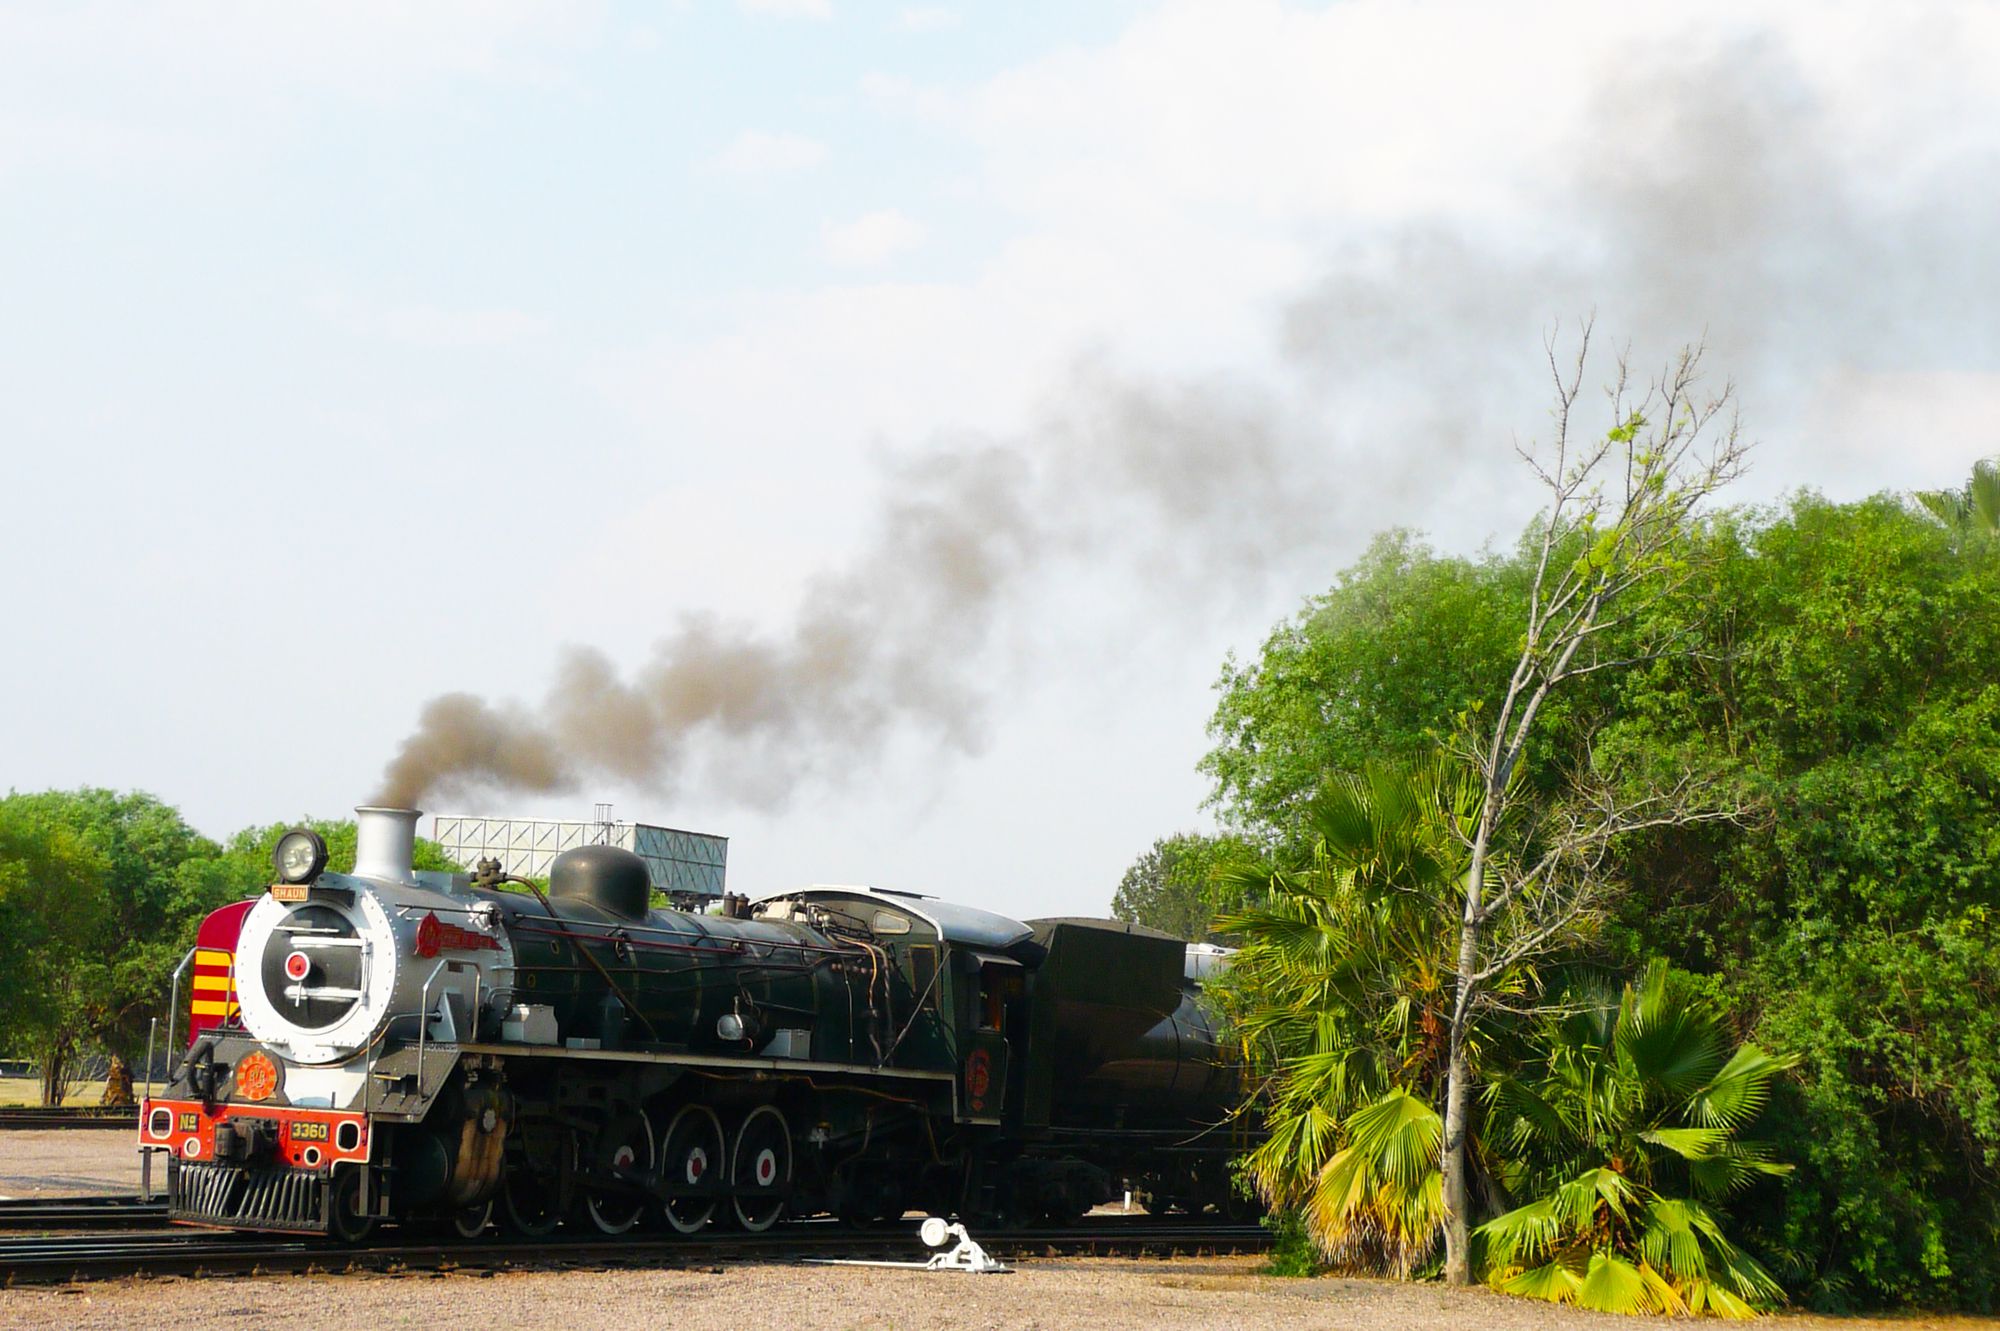 <p>African safaris aren’t limited to lodges and vehicles with four-wheel drive. If you’re feeling adventurous, you can opt for a scenic train ride with Rovos Rail in South Africa instead. You’ll have different itineraries to choose from, but the Cape Town to Pretoria option is likely one of the most epic.</p><p>This ride is an 11-day journey that includes an ostrich farm visit, a boat cruise, multiple game drives, city tours and more. In addition, your private sleeper coach makes it easy to enjoy the South African landscapes as you pass by, including the beaches, lakes, and rolling hills of the famous Garden Route.</p>